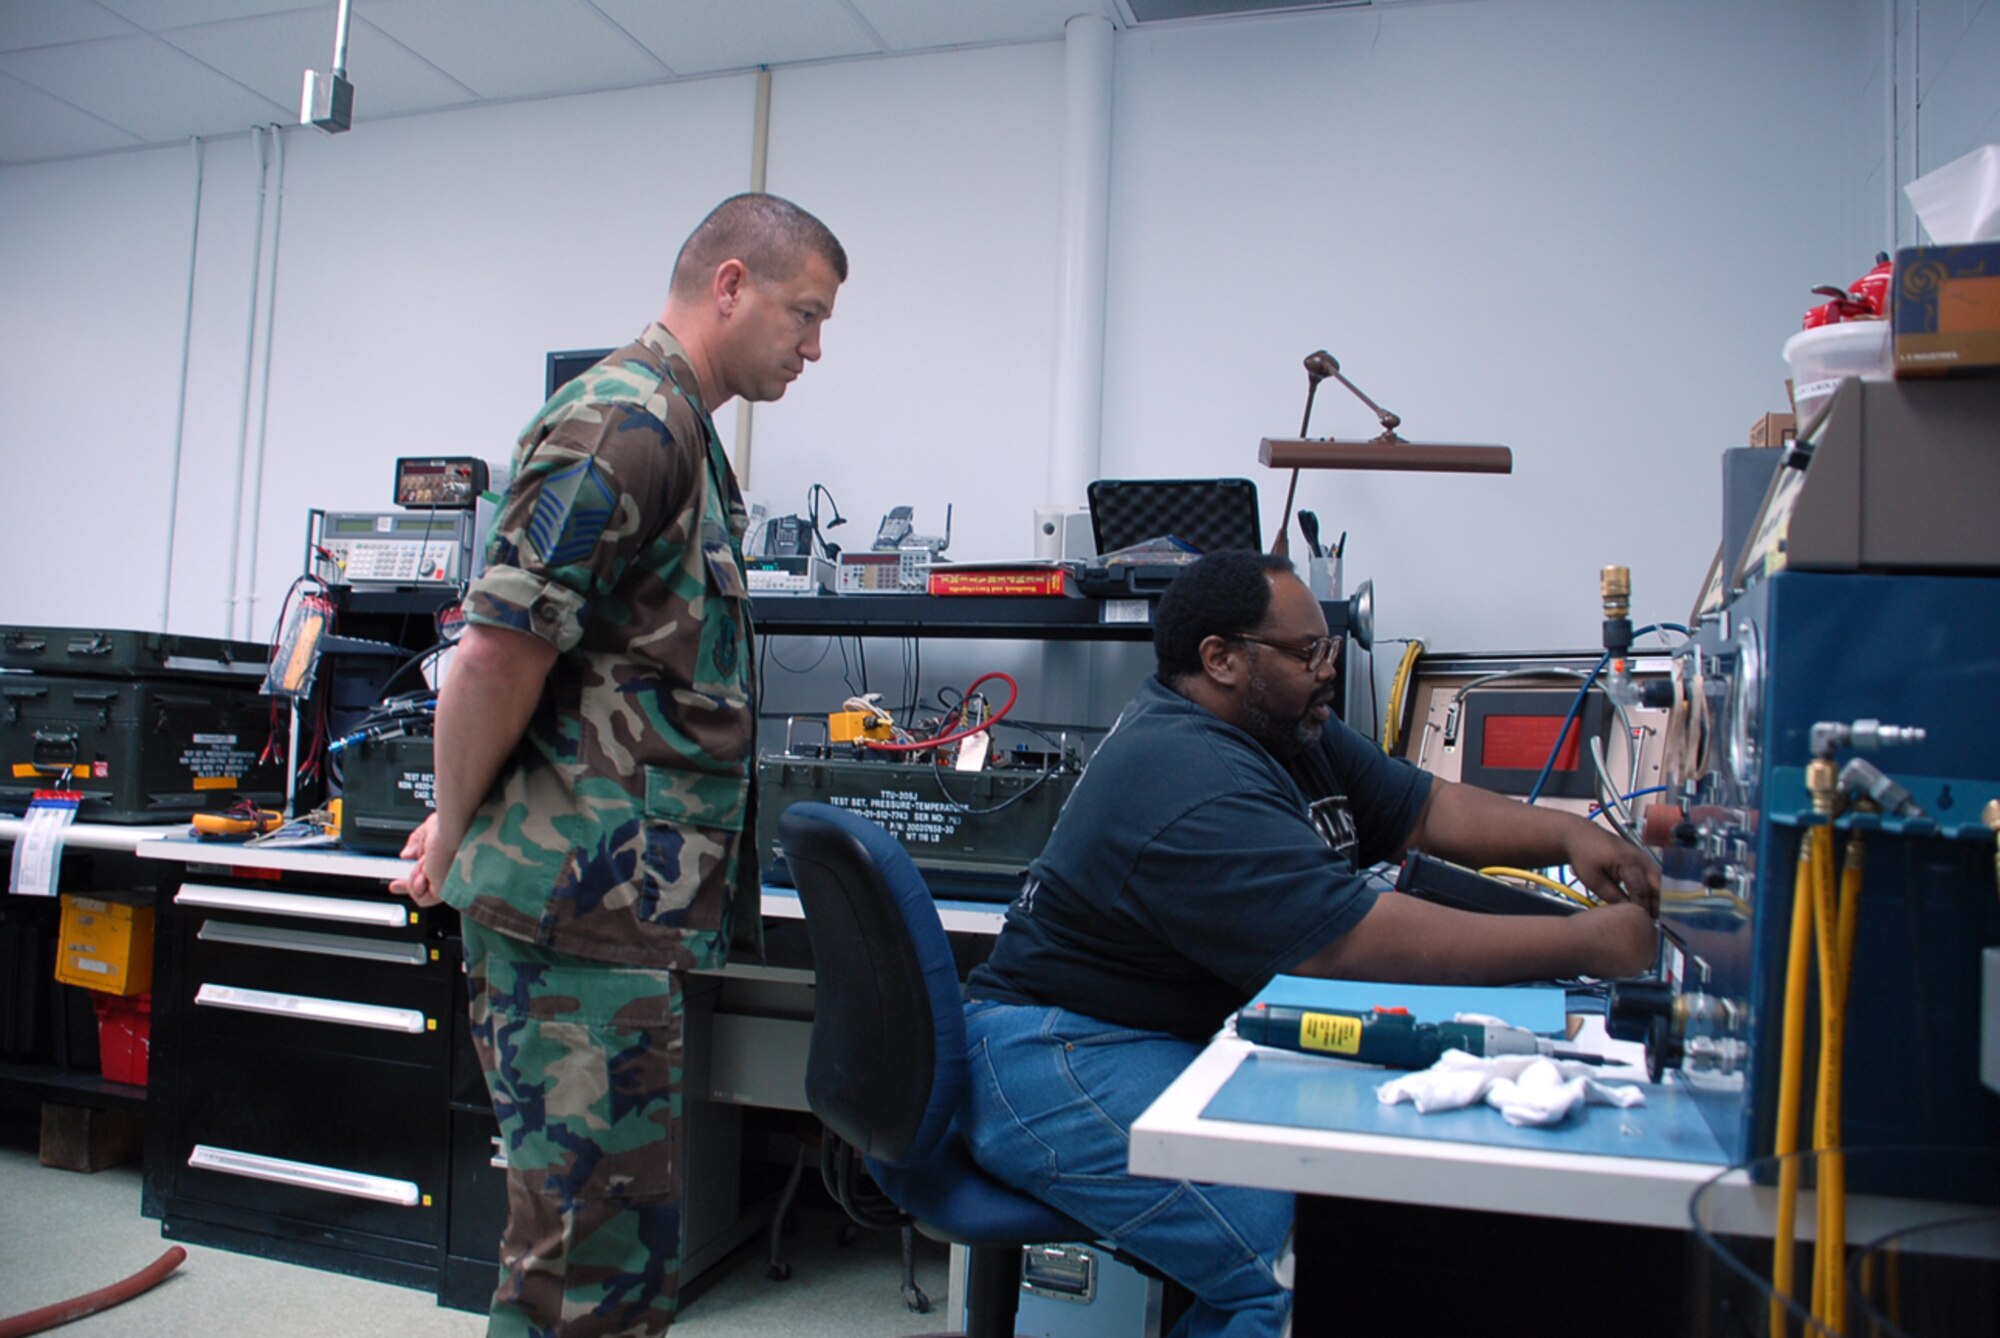 Master Sgt. Michael Sumich, 562nd Combat Sustainment Group, oversees Michael Warring’s calibration of a digital vacuum transducer as part of Dover Air Force Base’s precision measurement equipment laboratory biannual evaluation and certification. Most PMEL facilities are audited every two years to ensure their measurements and calibrations practices are ‘in tolerance.’ (U.S. Air Force photo/Tech. Sgt. Kevin Wallace)